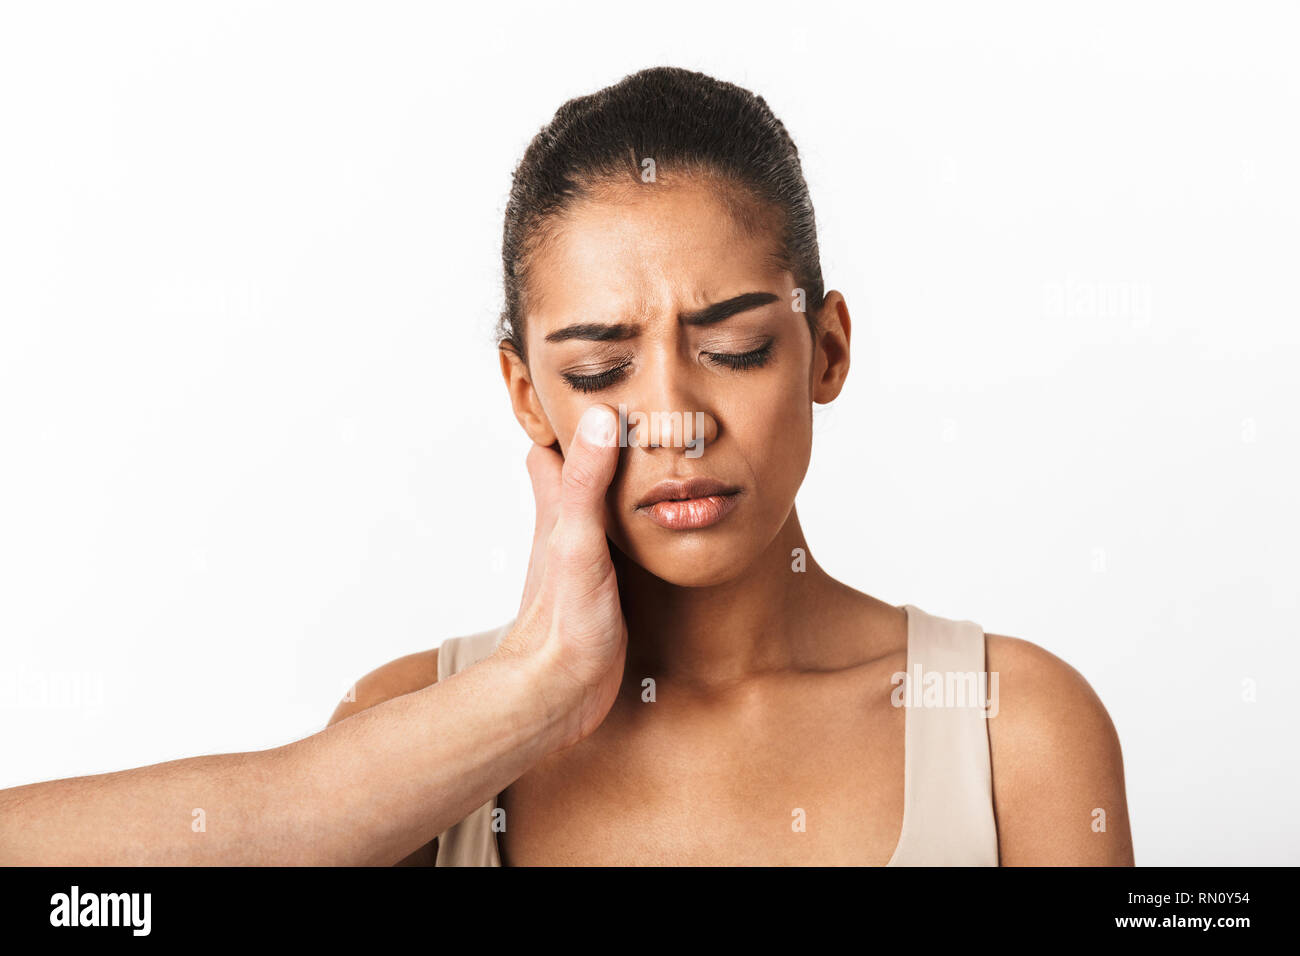 Upset young african woman crying with man's hand on her face isolated over white background Stock Photo